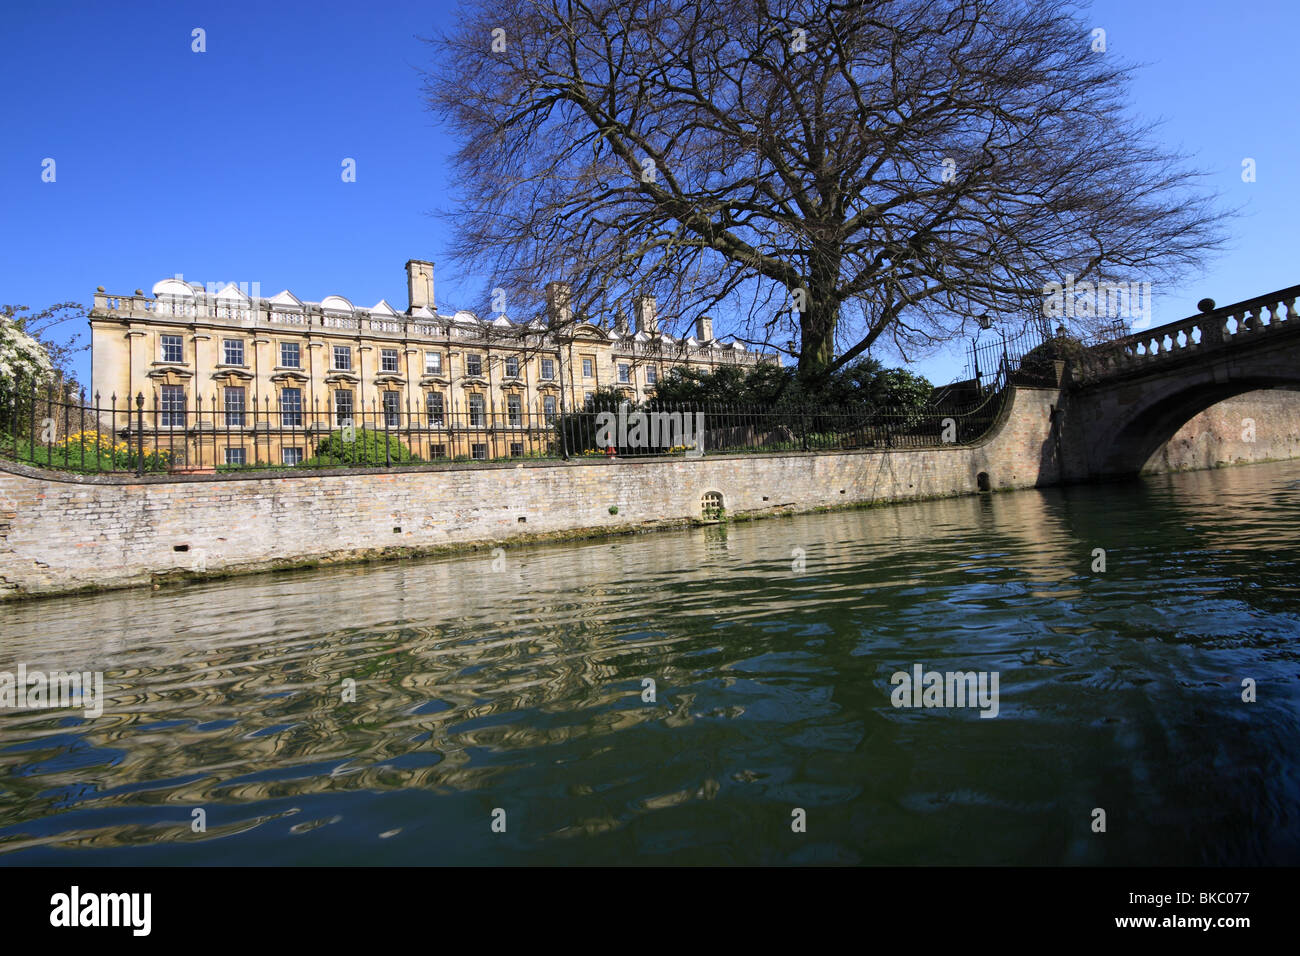 A view of Clare College, Cambridge from the River Cam Stock Photo